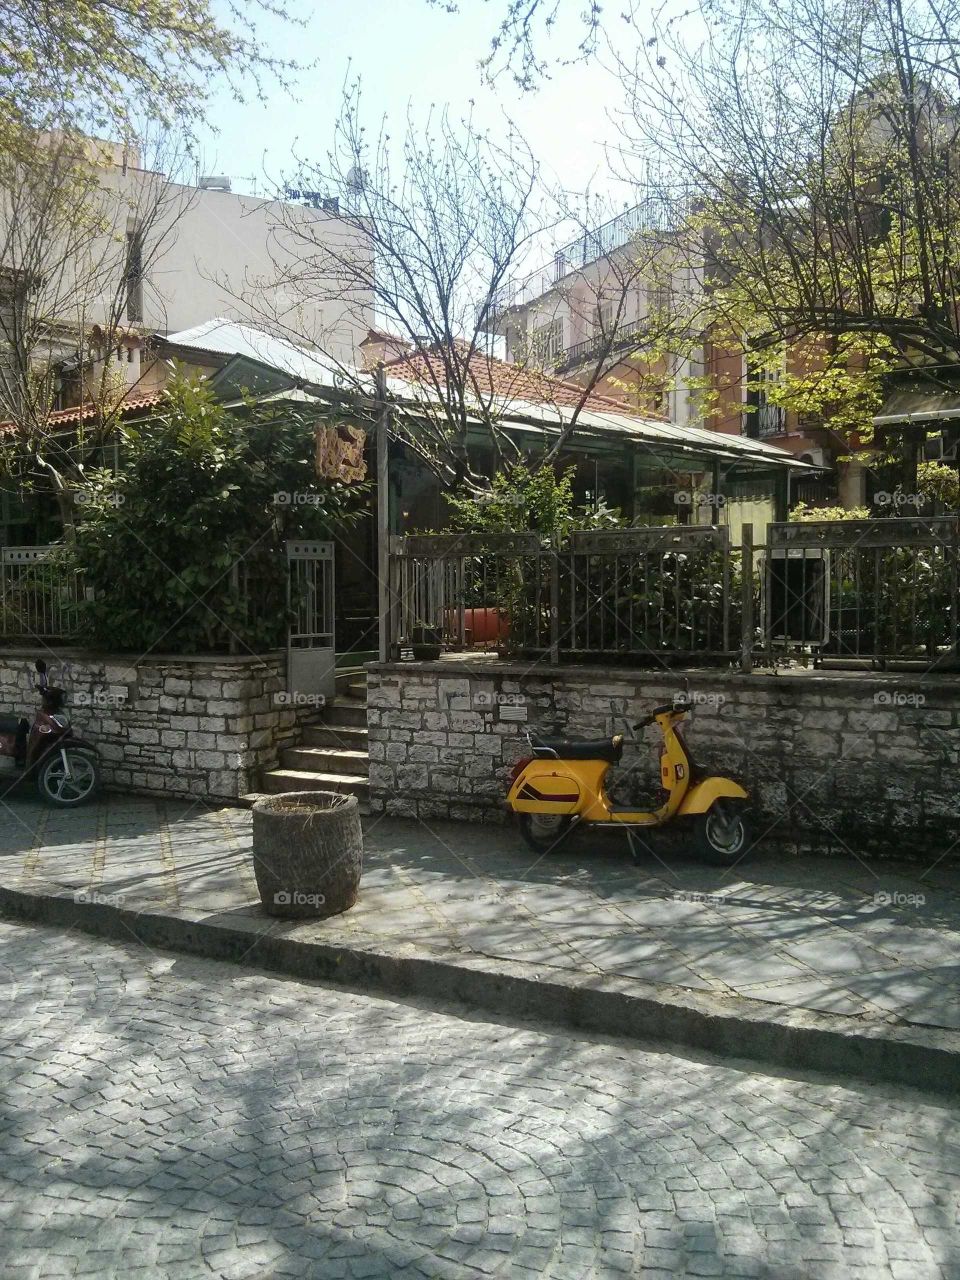 Traditional cafe in Giannena, Greece. Parked outside is a yellow moped